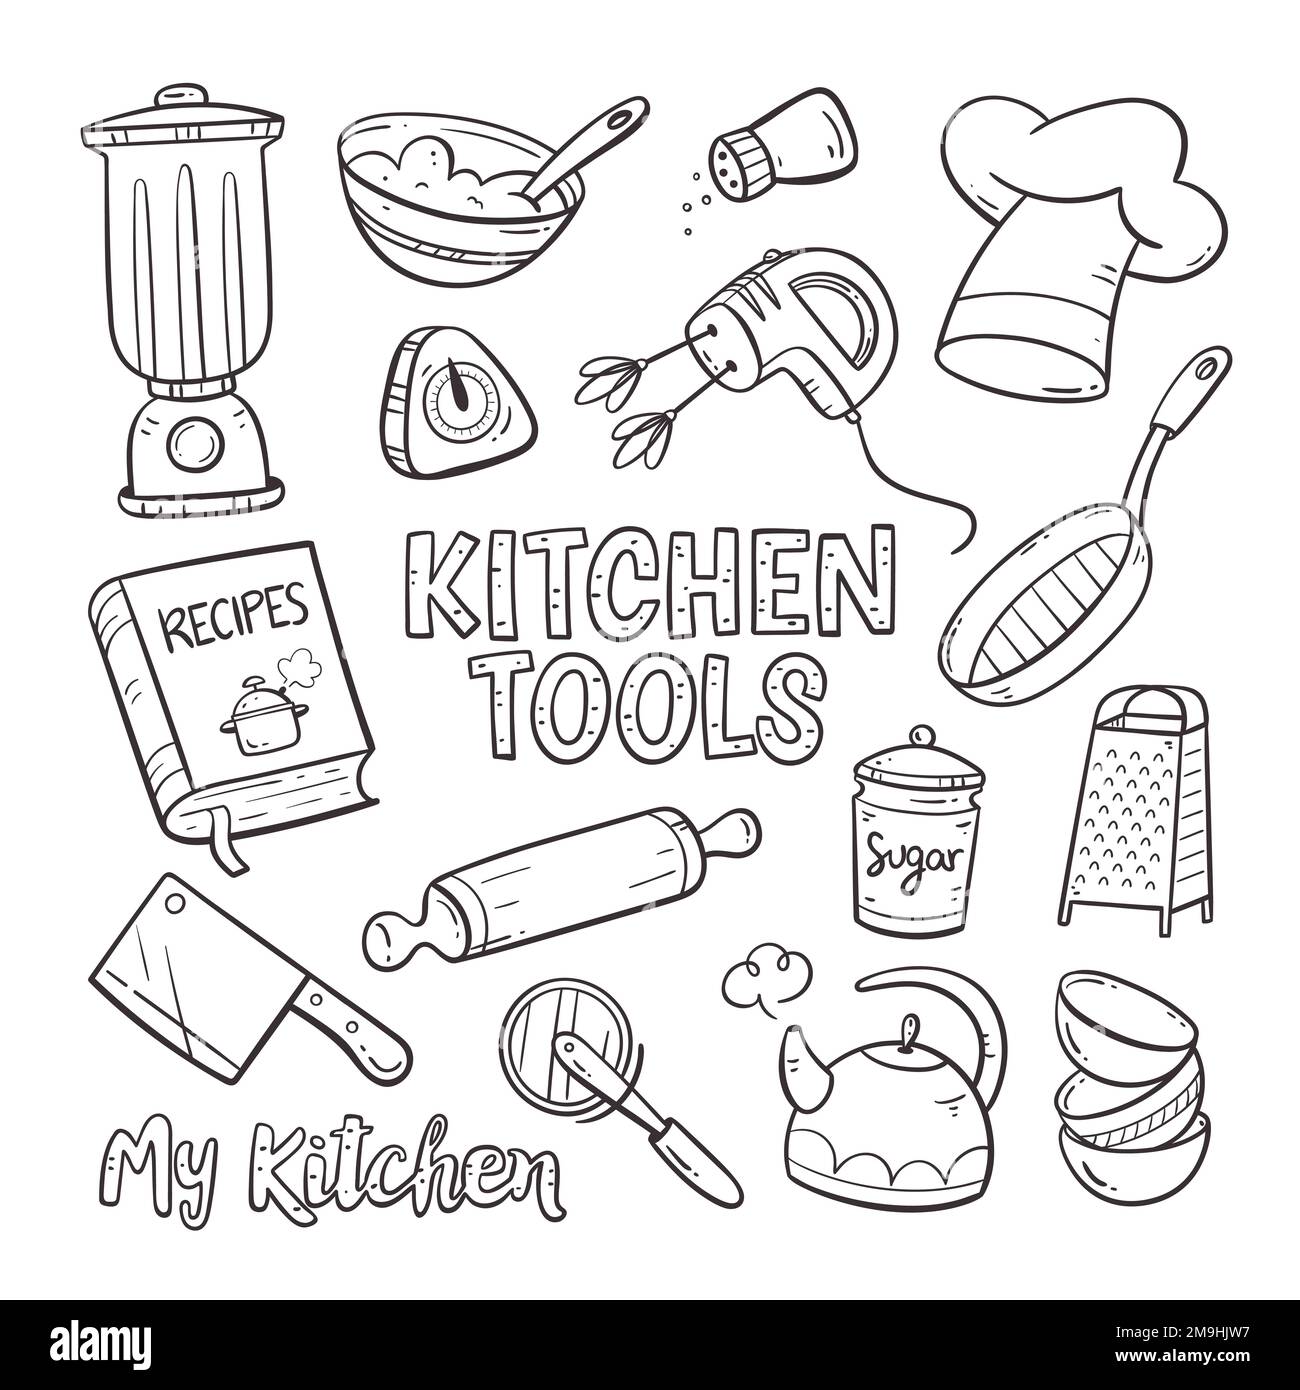 Doodle kitchen tools and appliances. Cute illustration with isolated cooking objects in vector format. Kitchen utensils collection. Illustration 1 of Stock Vector